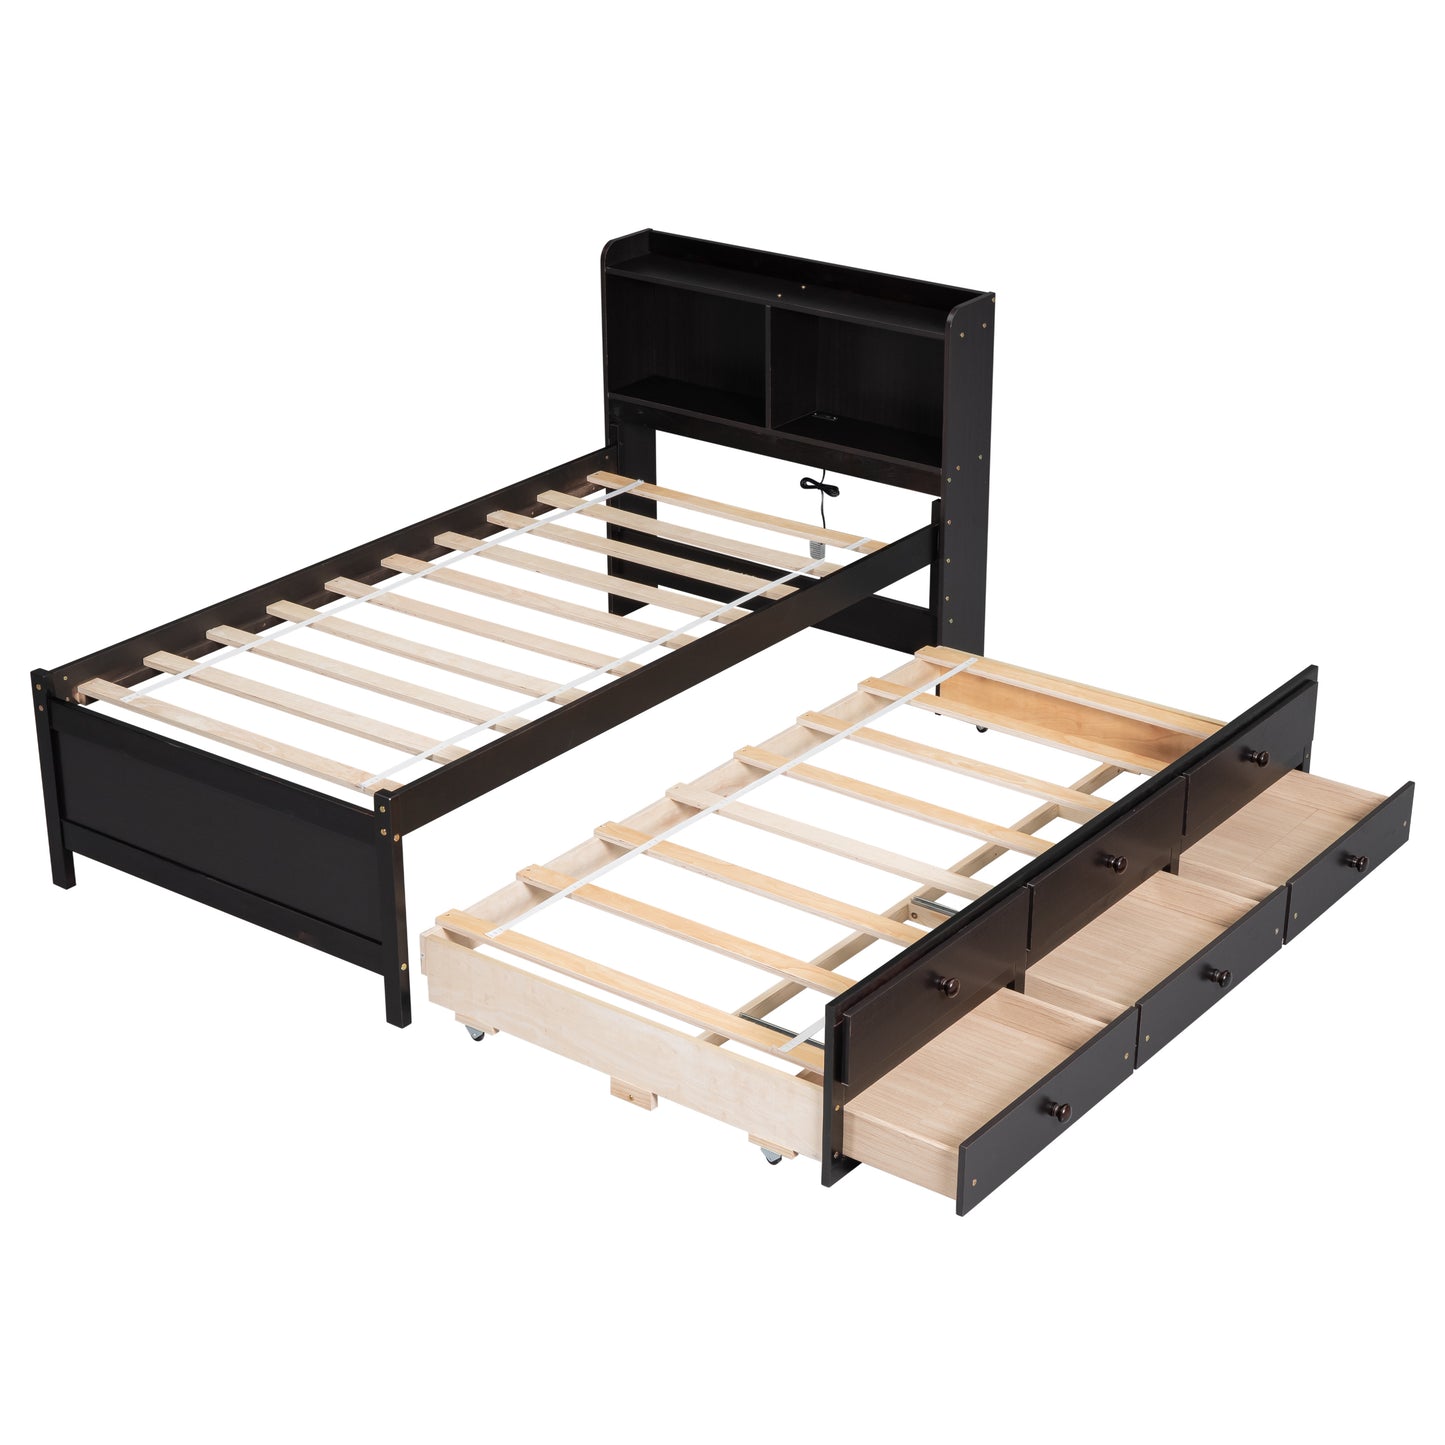 Twin Size Platform Bed with Built-in USB ,Type-C Ports, LED light, Bookcase Headboard, Trundle and 3 Storage Drawers, Espresso